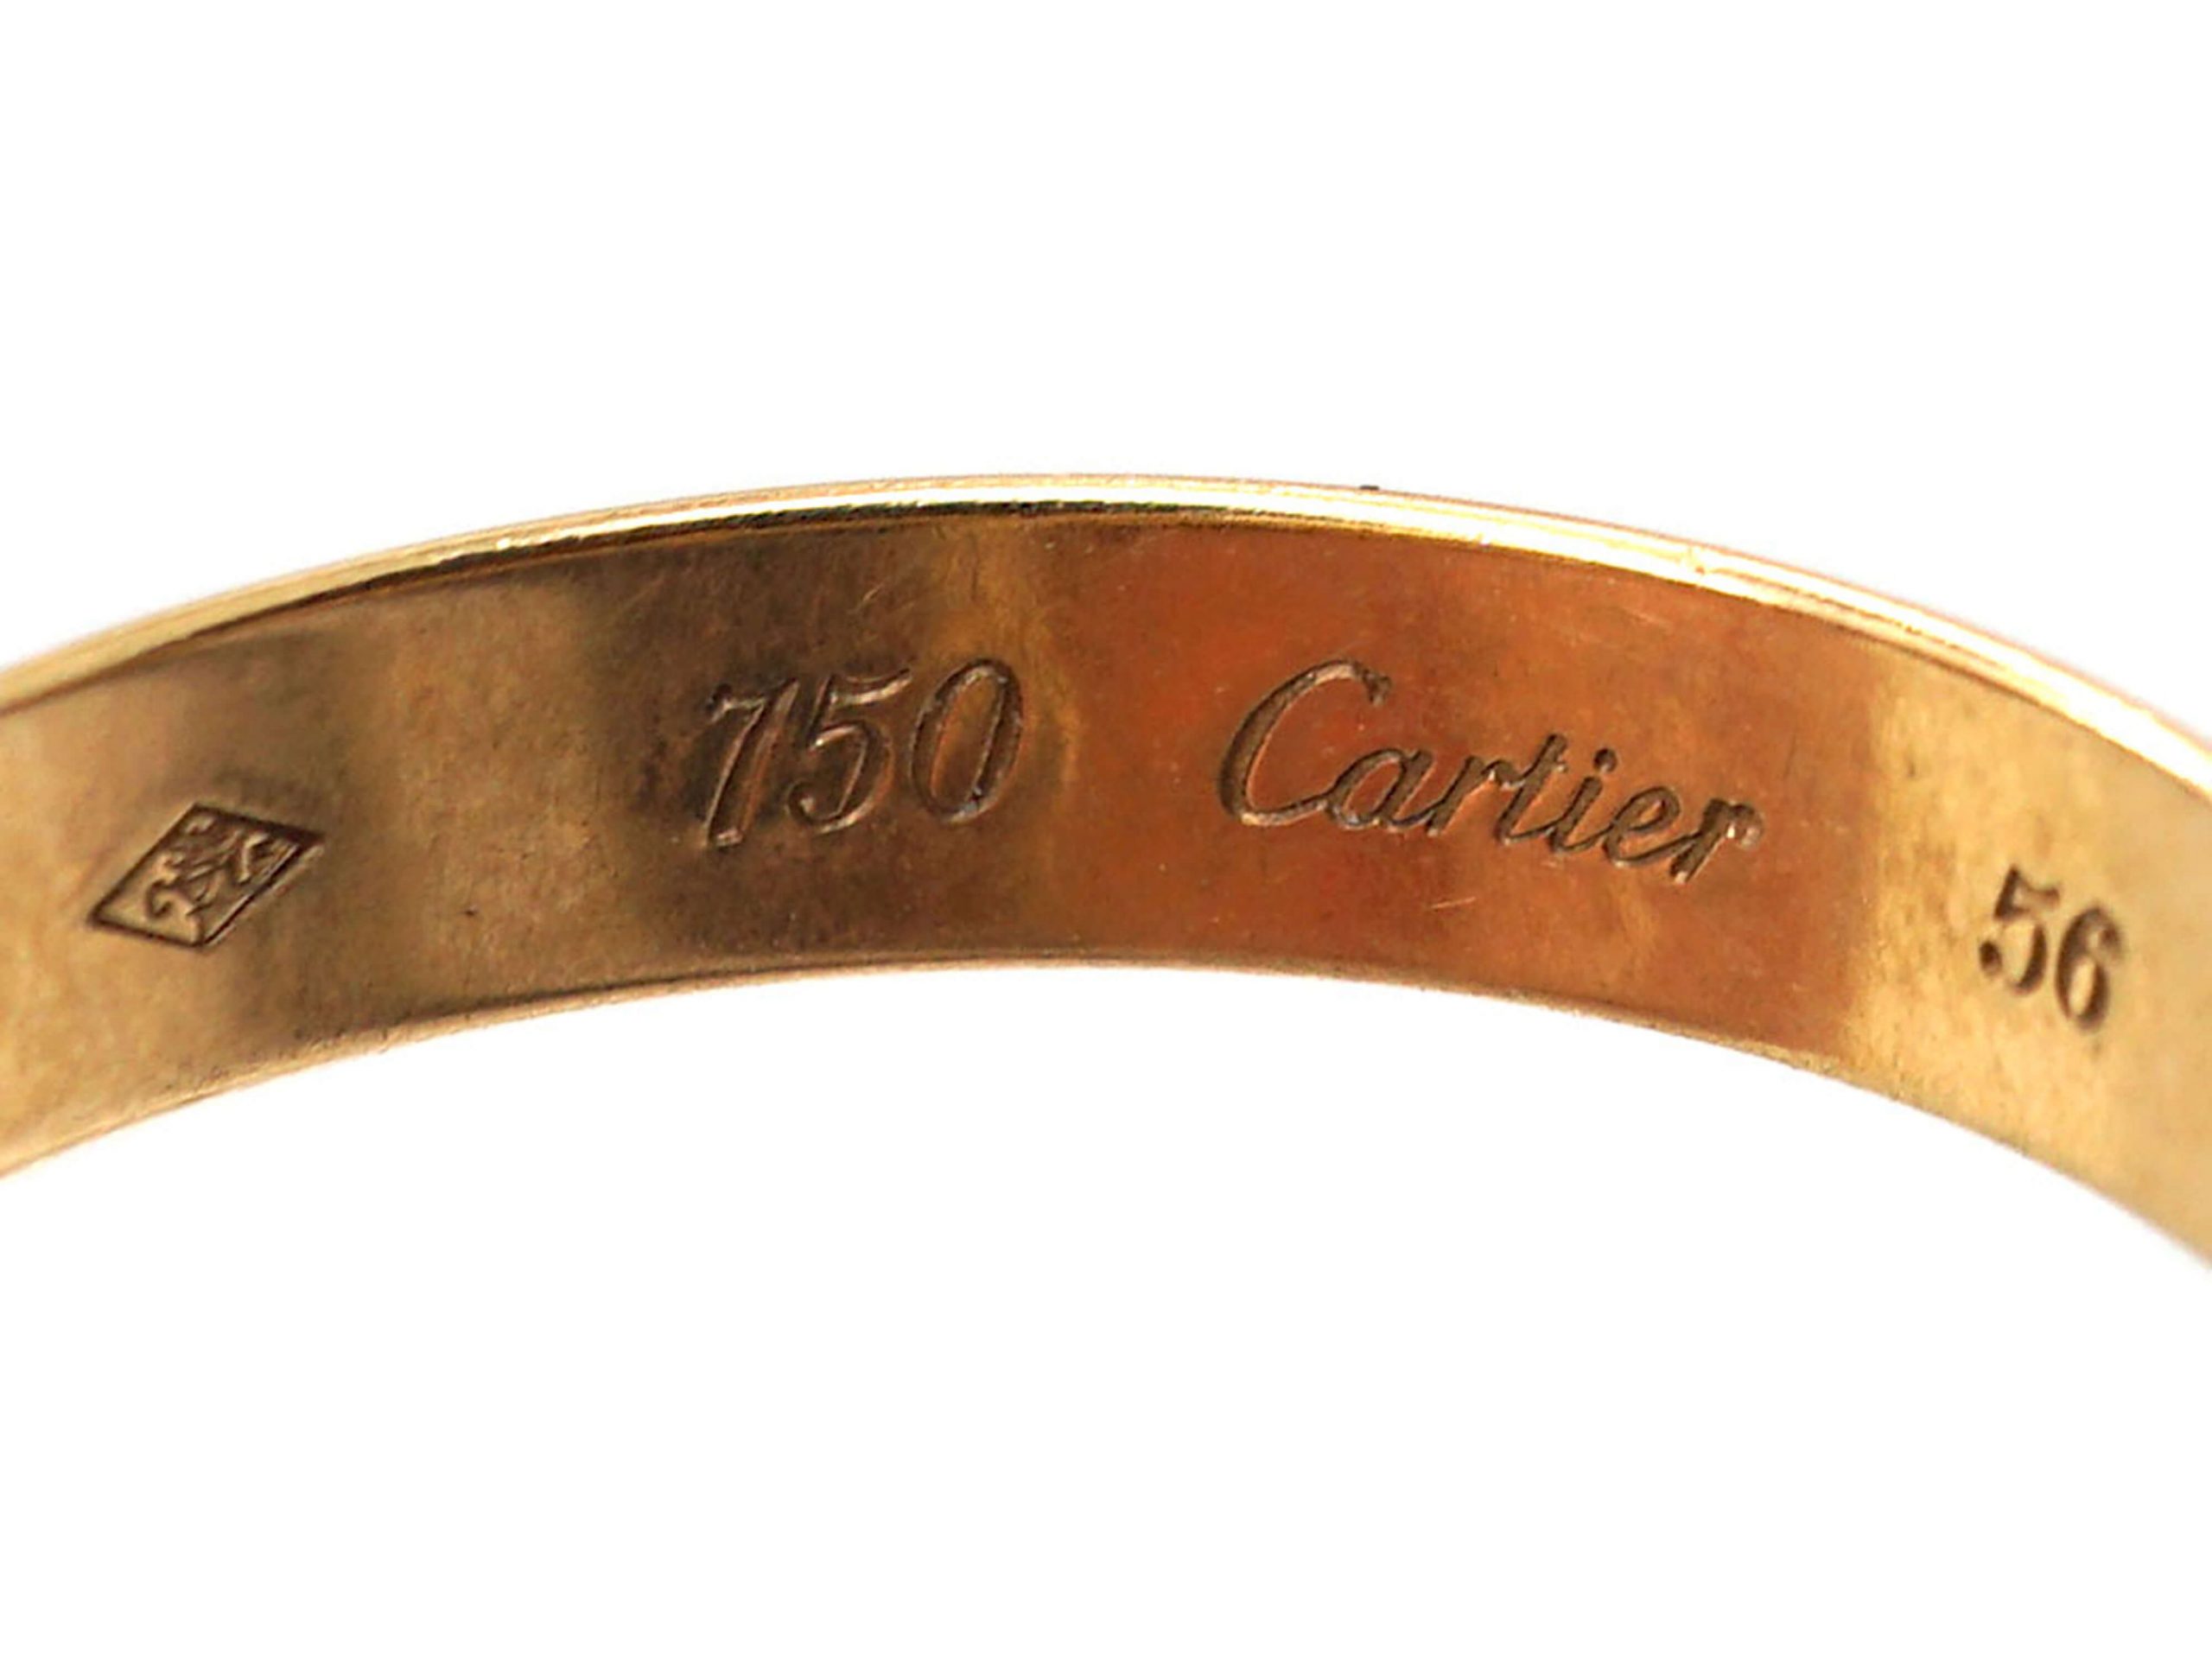 Cartier 18ct Gold Russian Wedding Ring (927S) | The Antique Jewellery ...